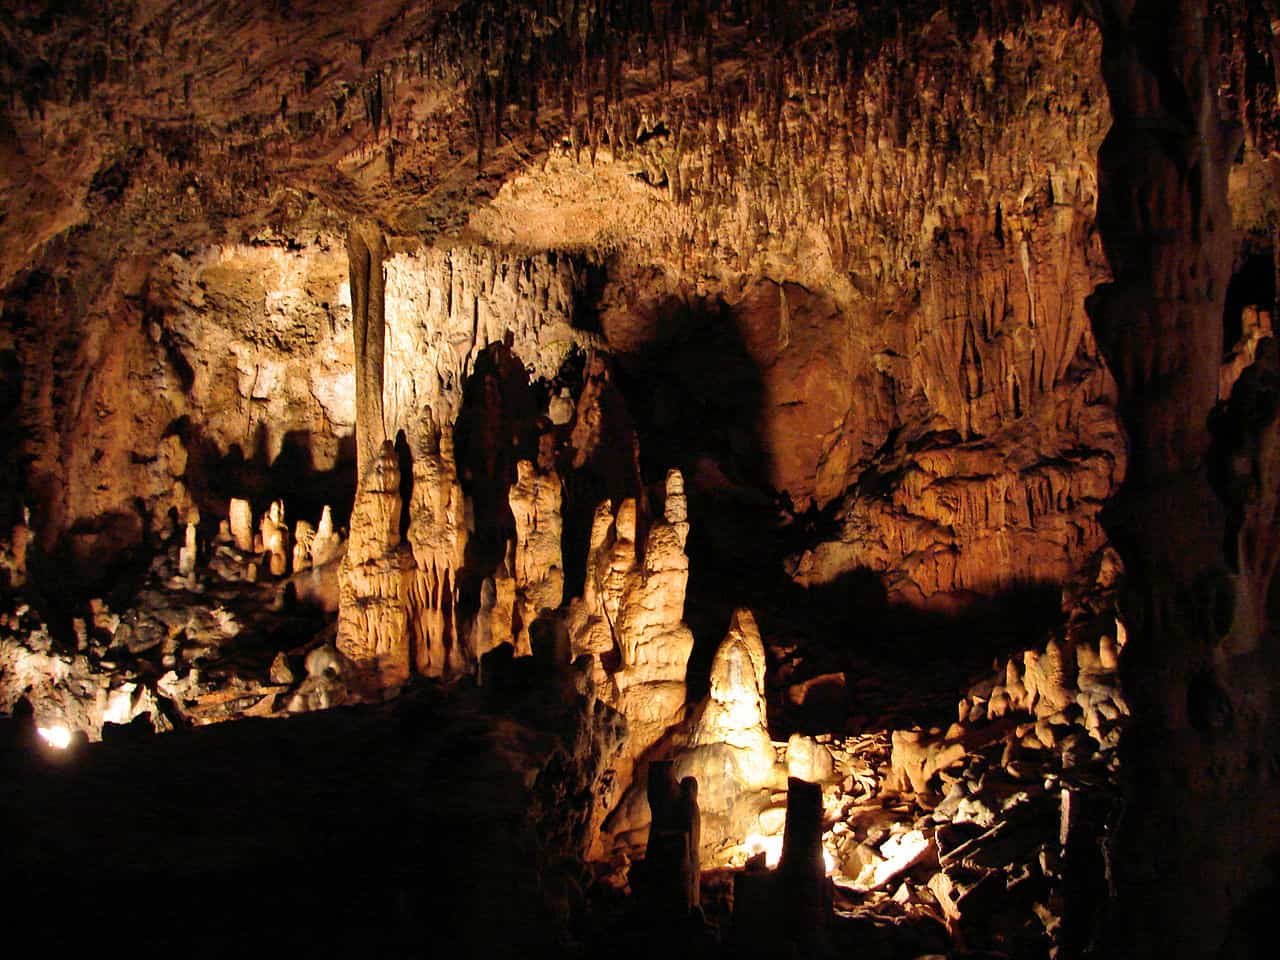 National monument of Anguilla - Fountain Cavern National Park